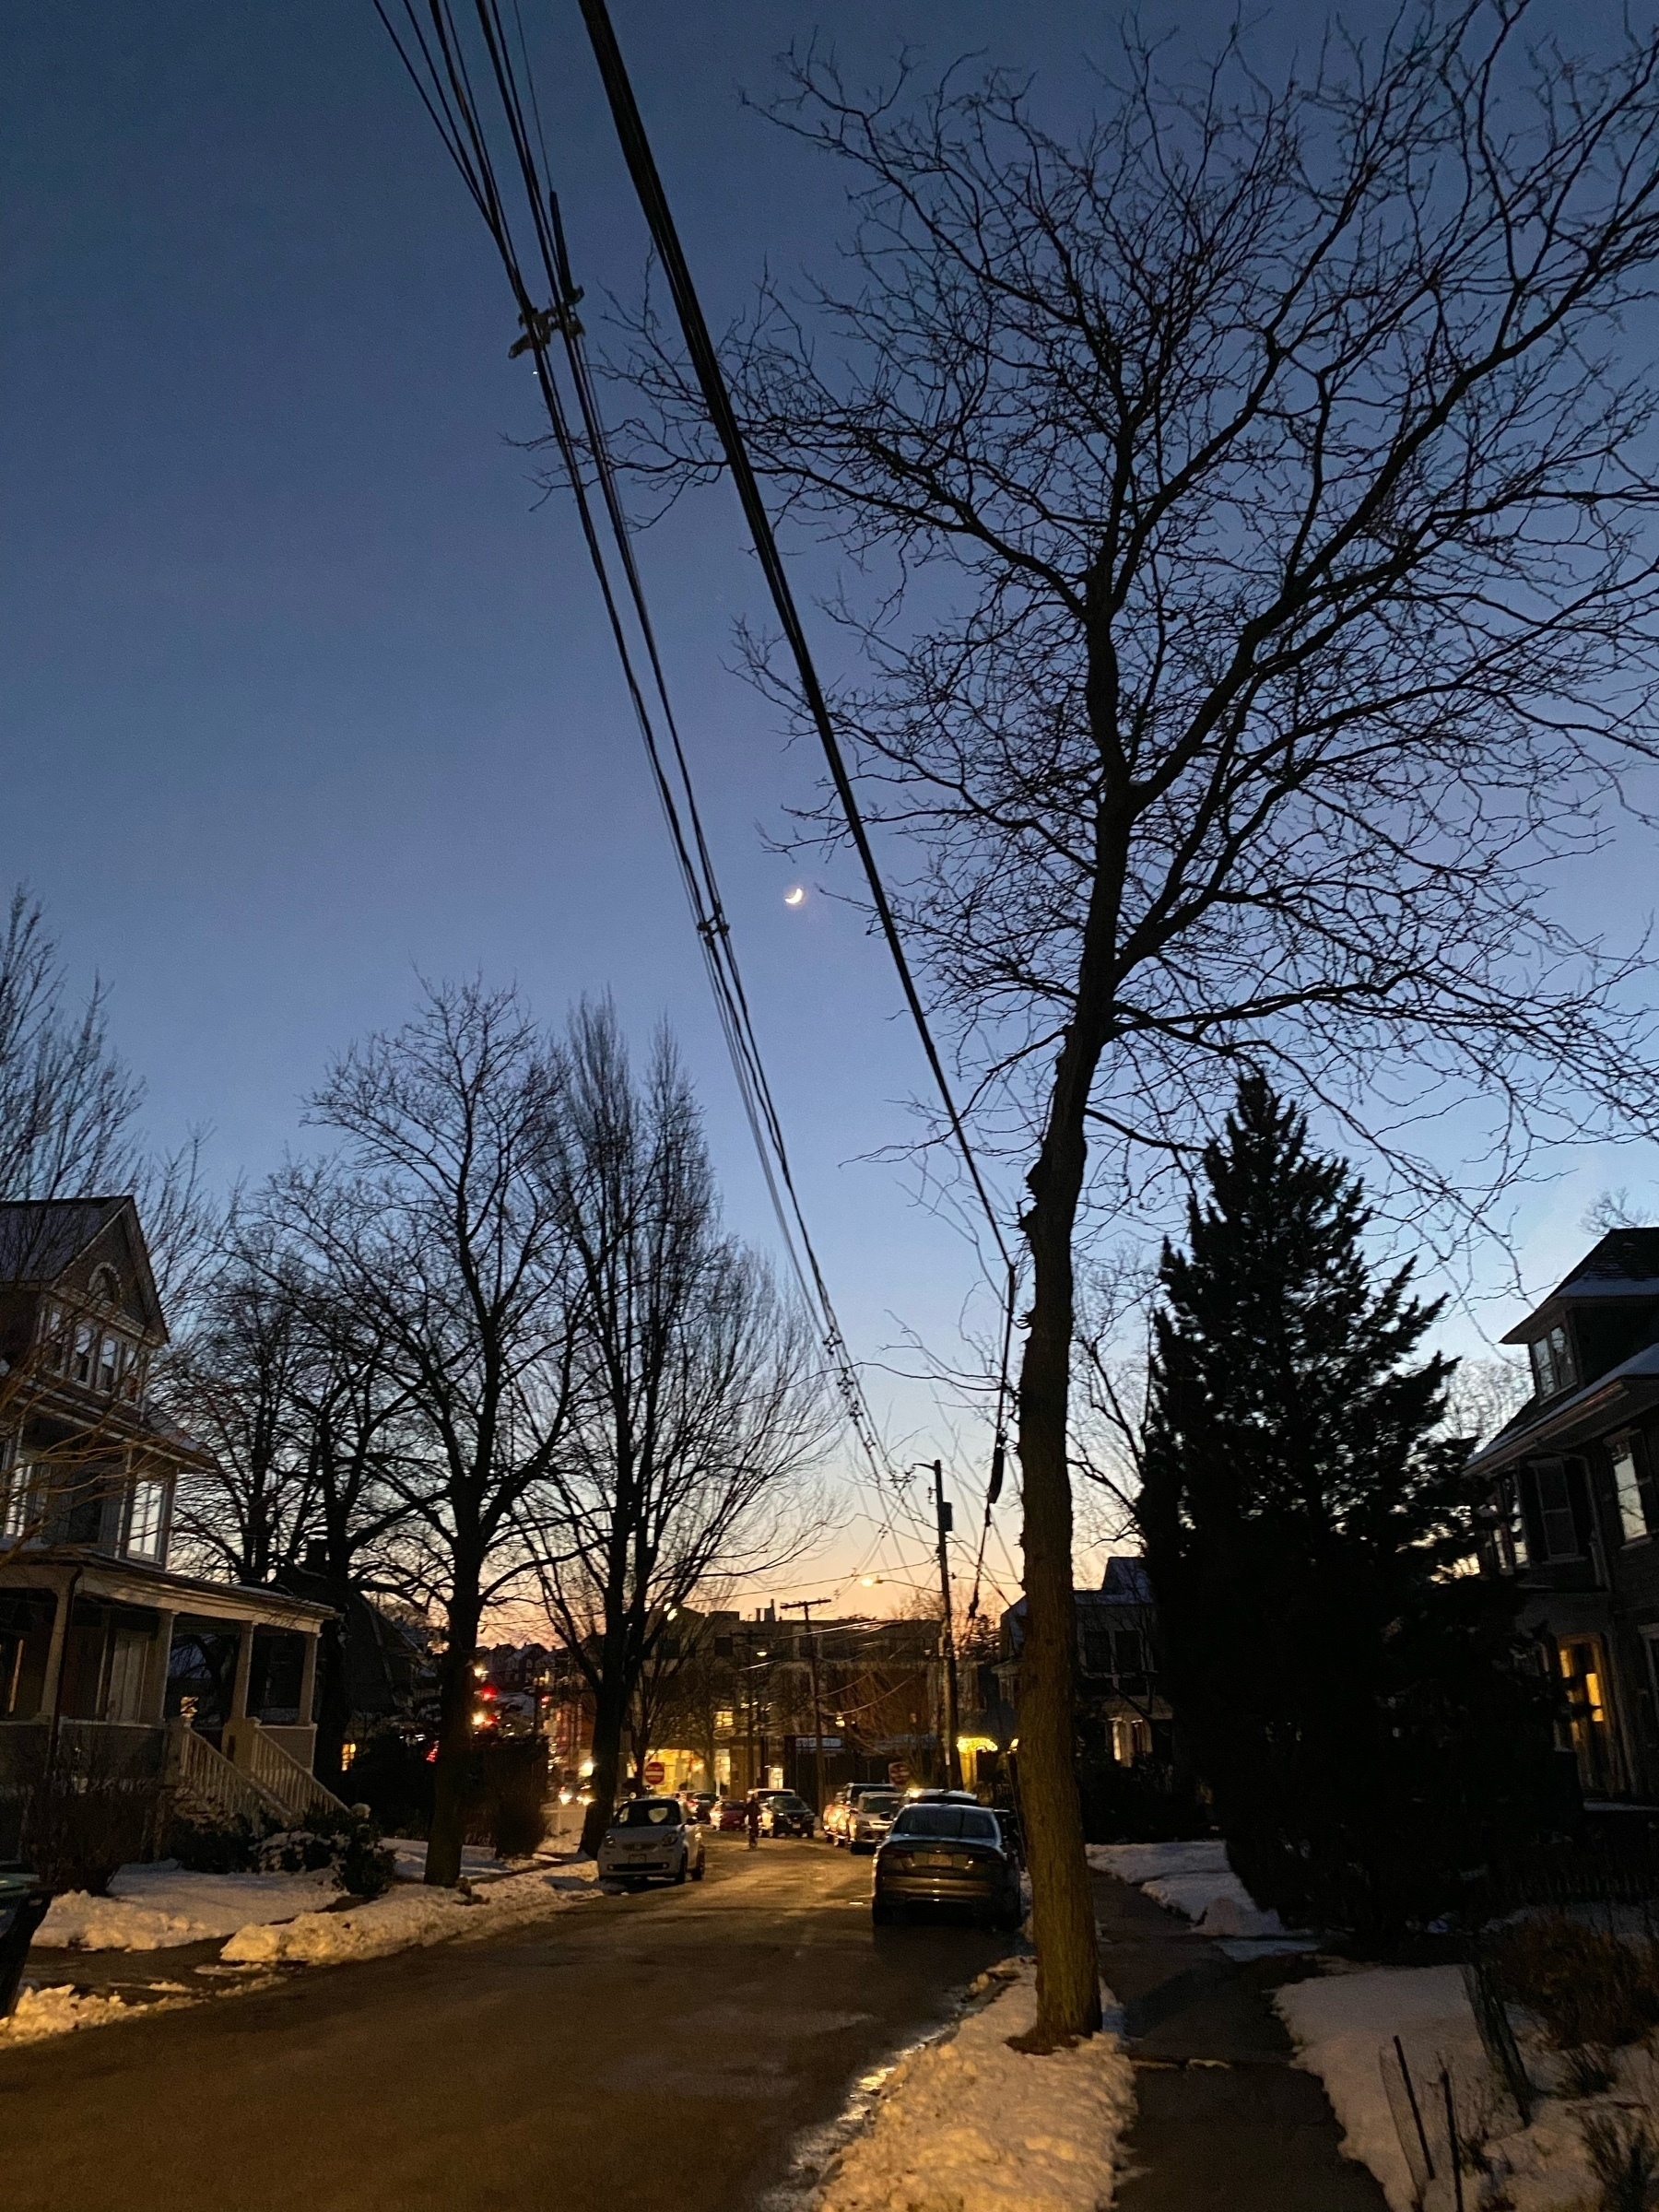 View of a street in the evening, with a small sliver of moon visible behind the bare trees and power lines.